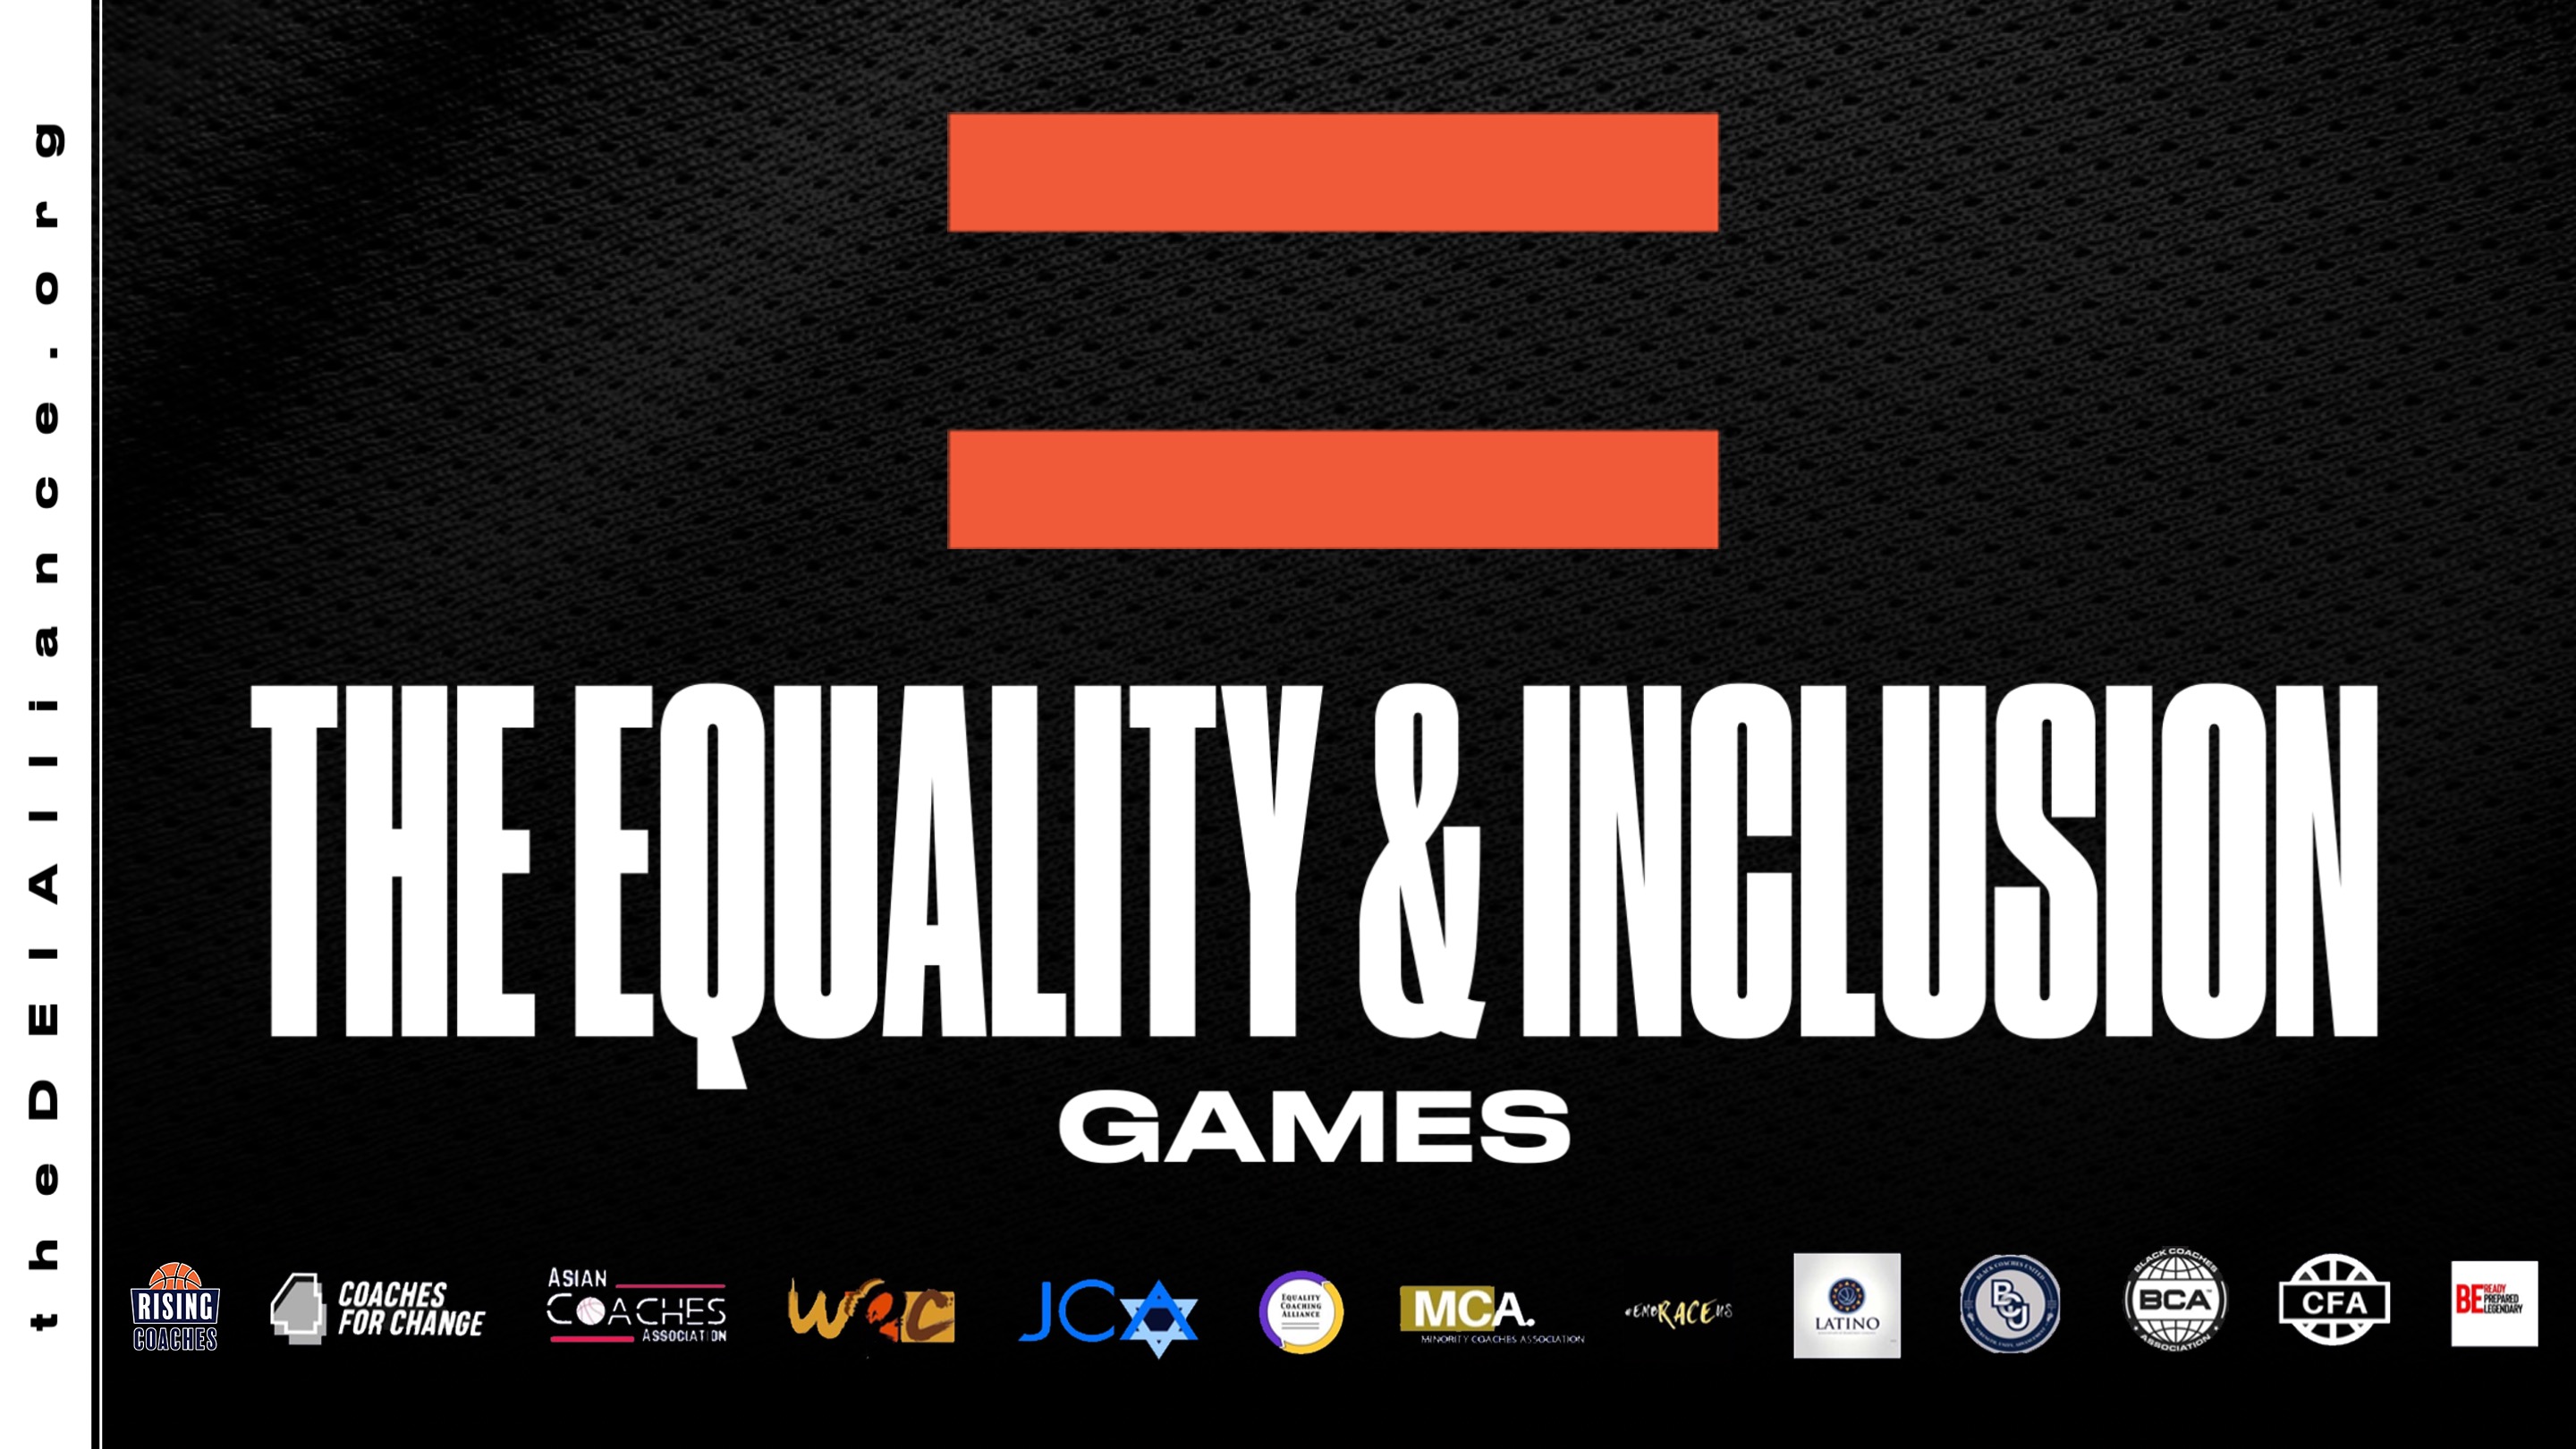 DEI Alliance to Host 2nd Annual “Equality and Inclusion Games” Throughout College Basketball